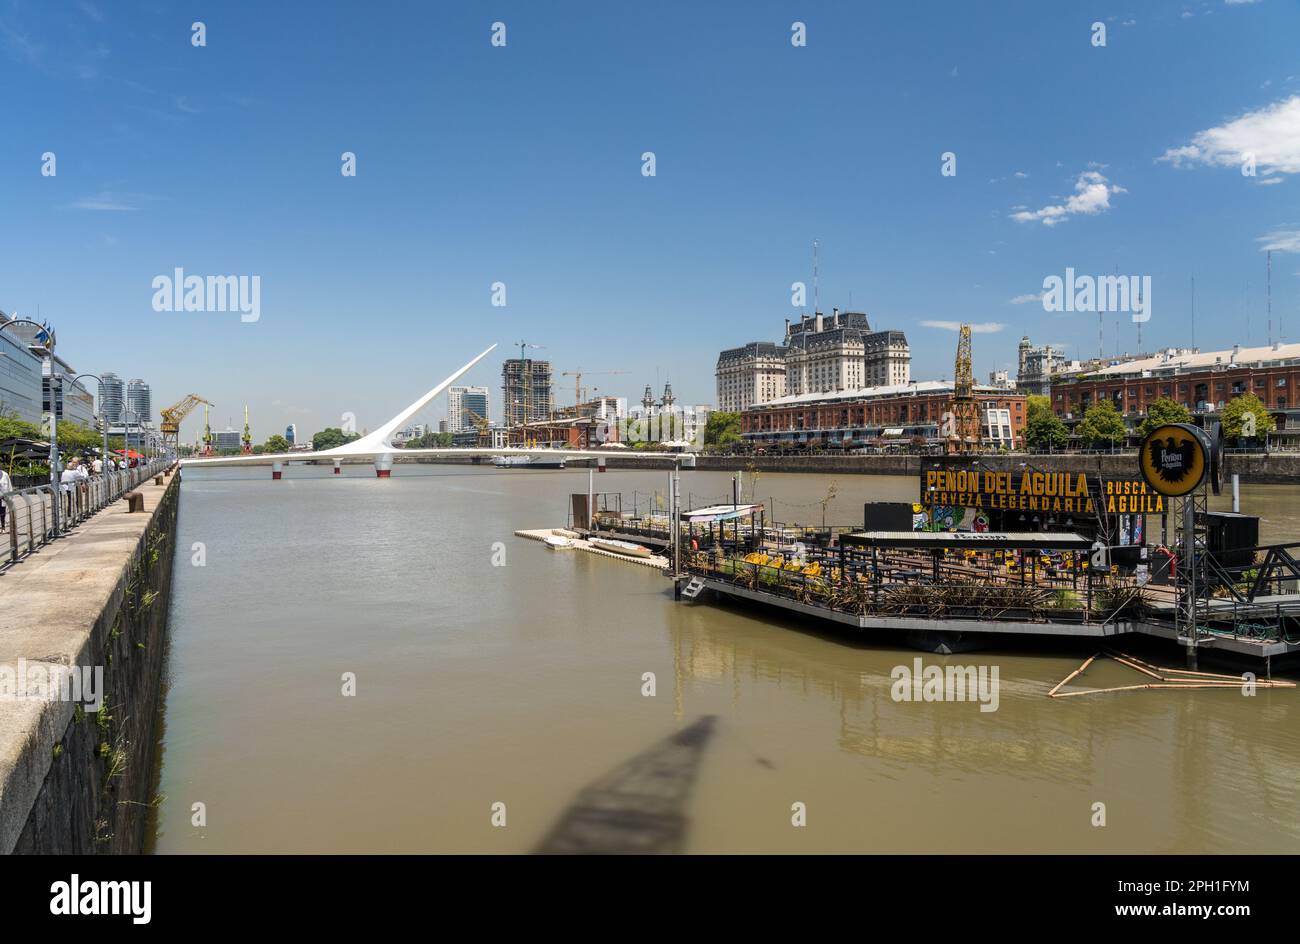 Buenos Aires, Argentina - 7 February 2023: Penon del Aguila floating bar and restaurant in Puerto Madero Stock Photo